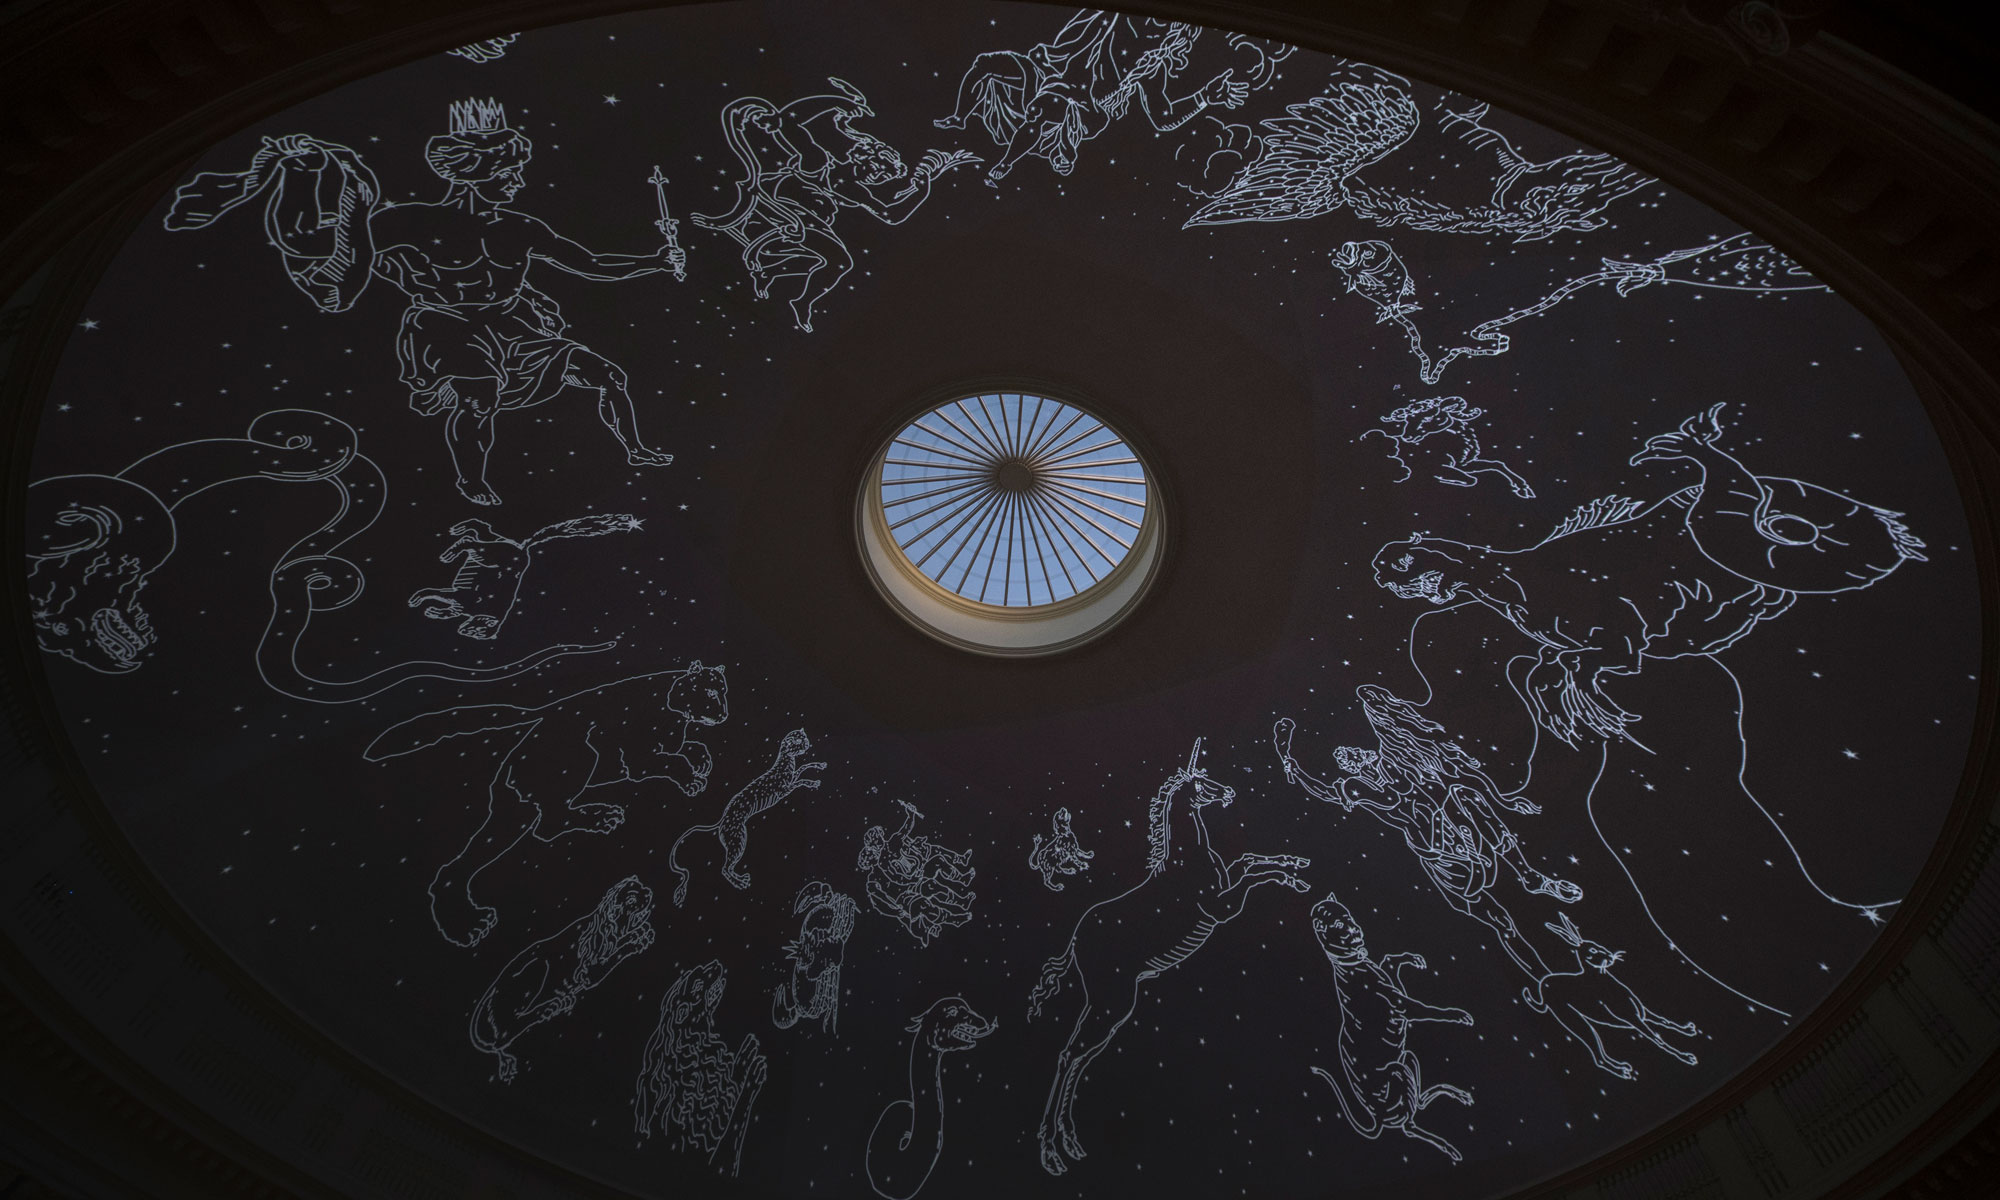 The dome of the Rotunda with constellations projected on it